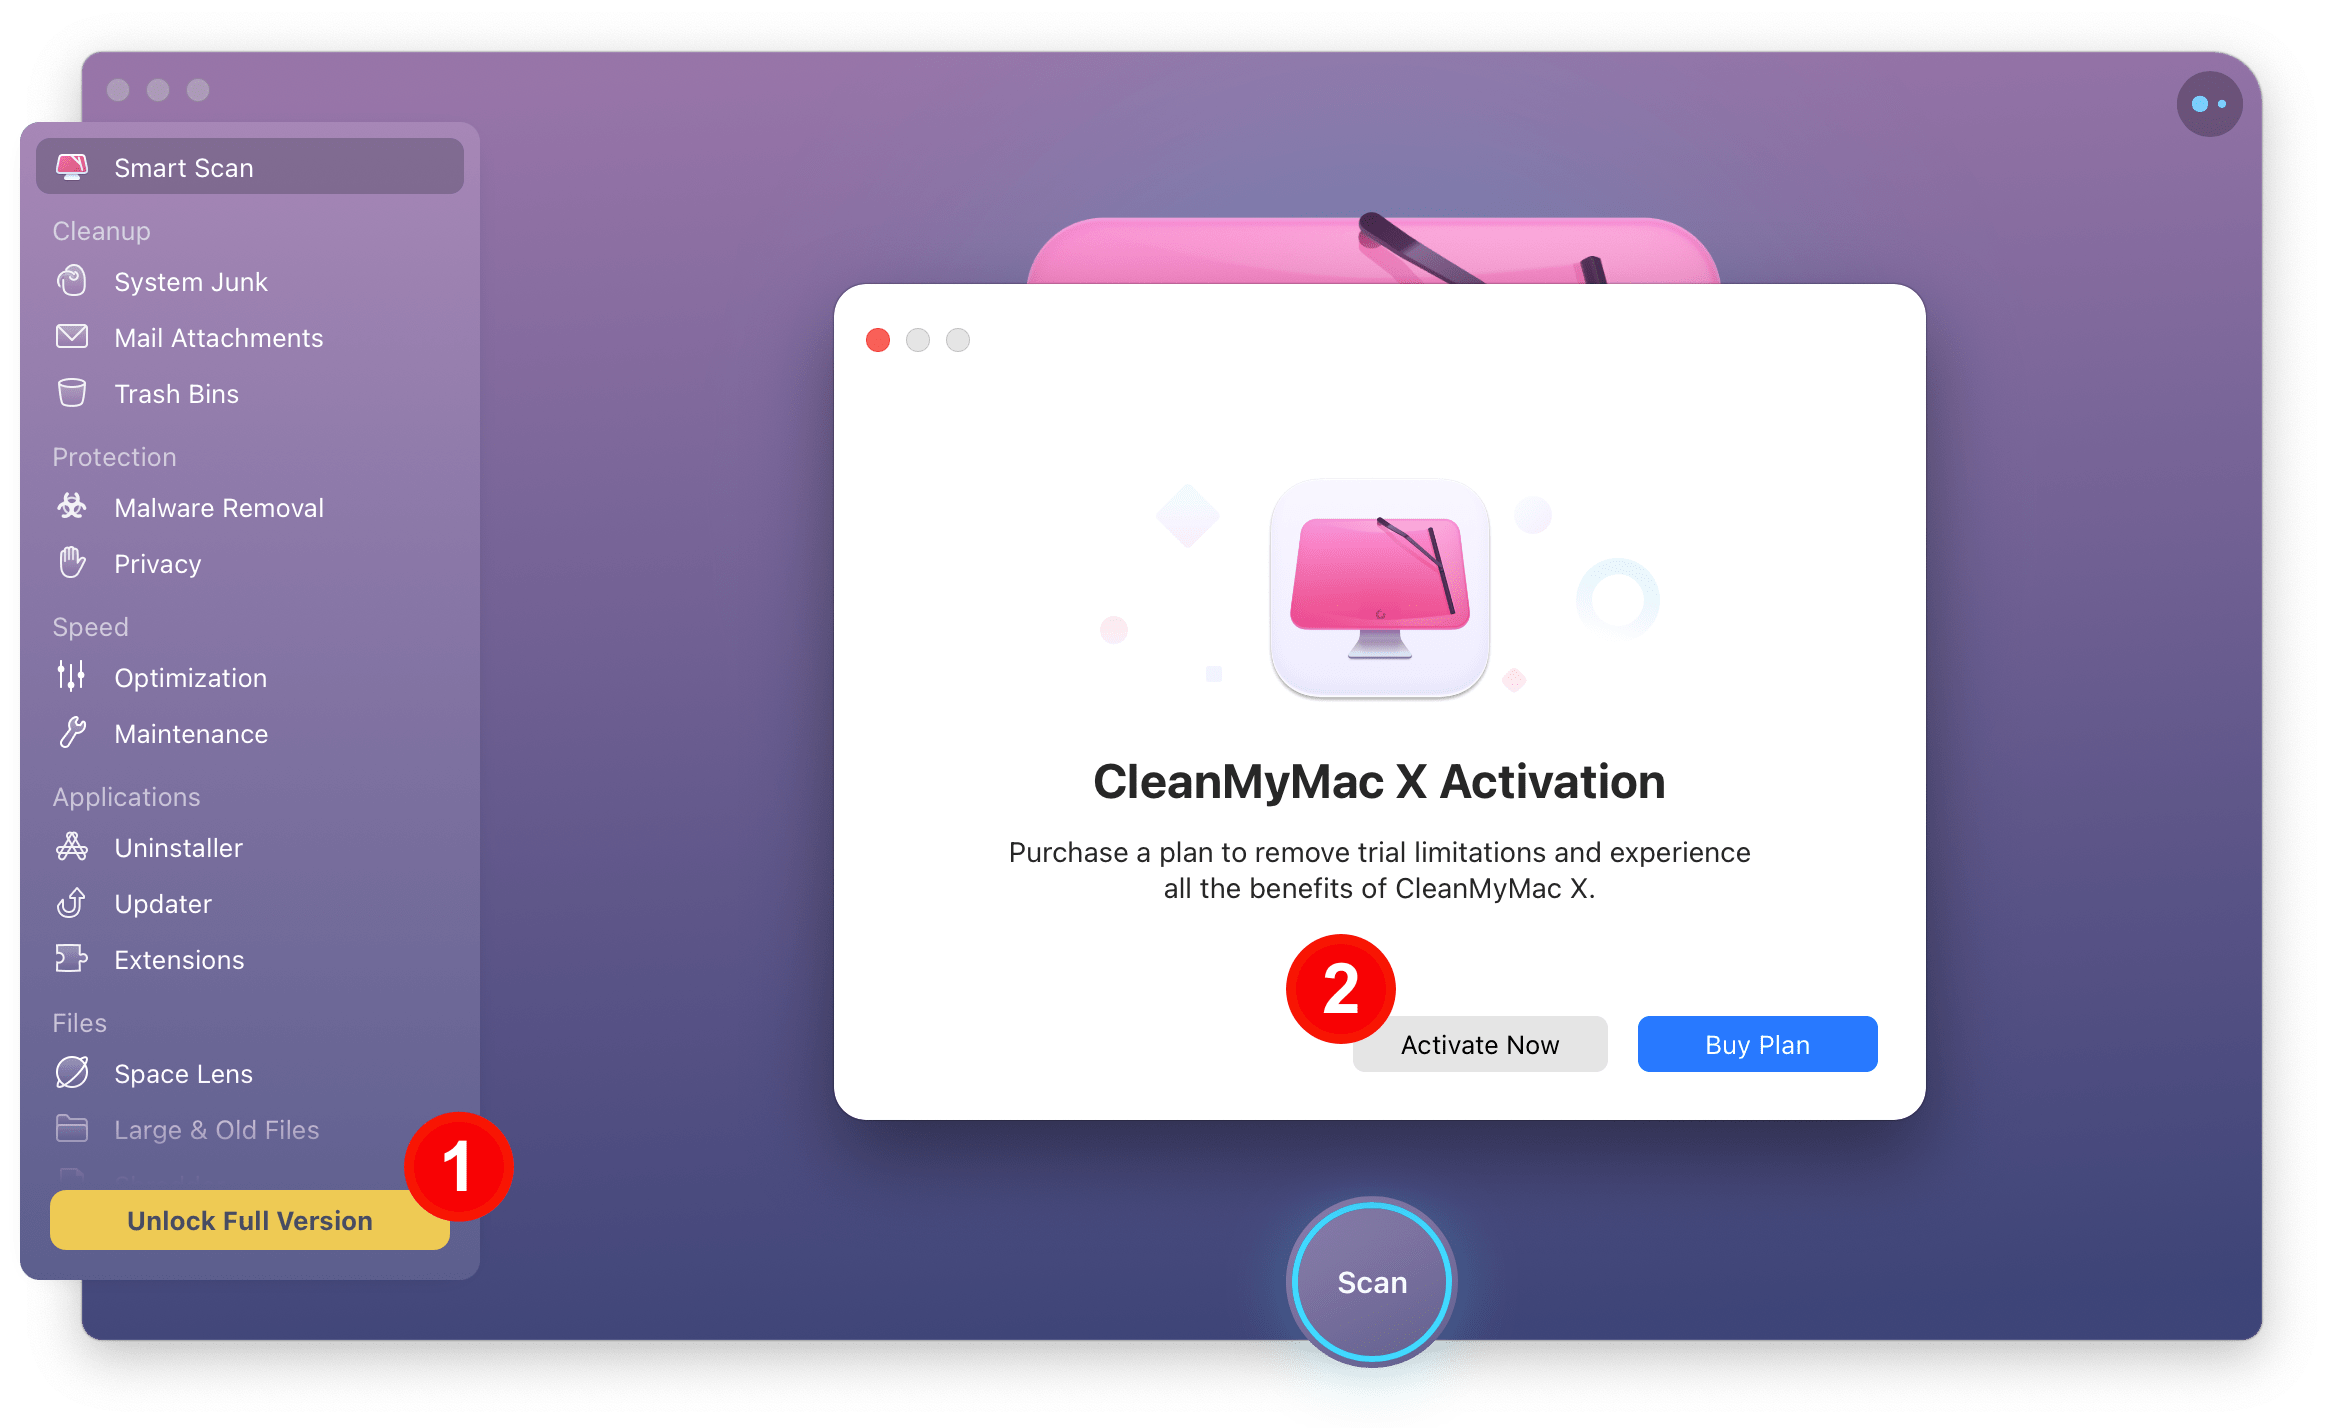 cleanmymac 3 activation code use on cleanmymacx